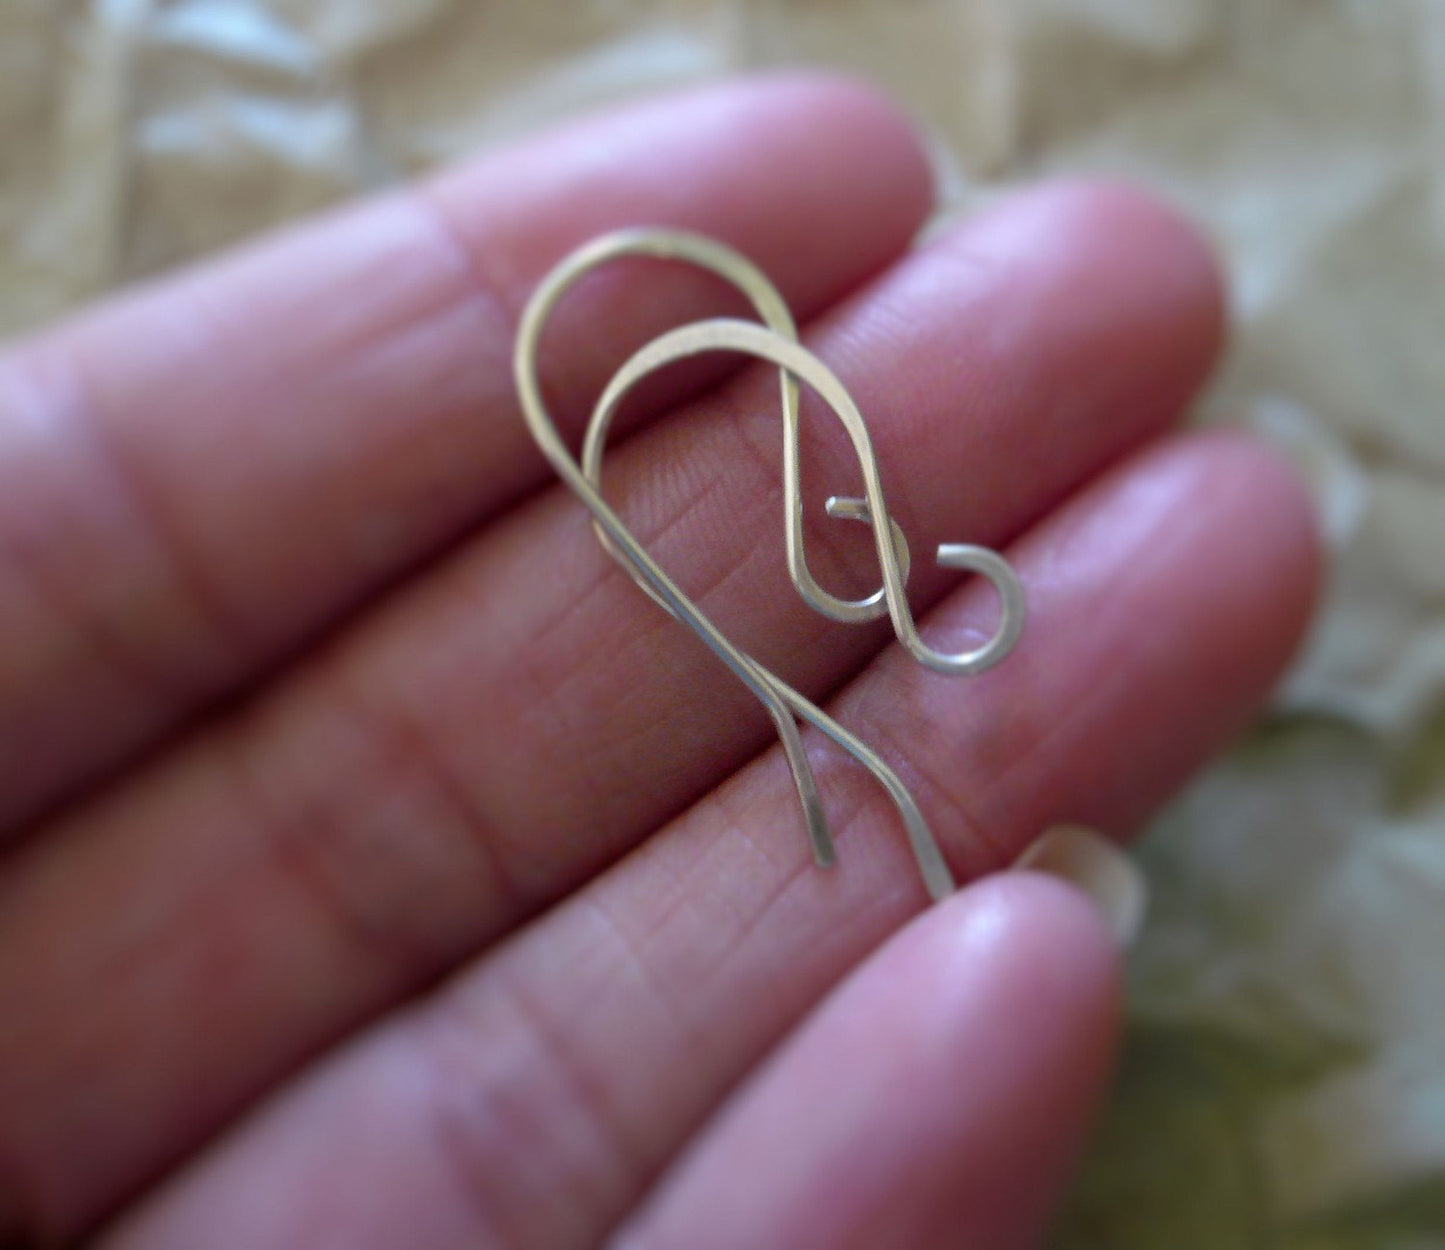 Sample Pack 4 pairs of my Sterling Silver Earwires - Handmade. Handforged. Heavily Oxidized